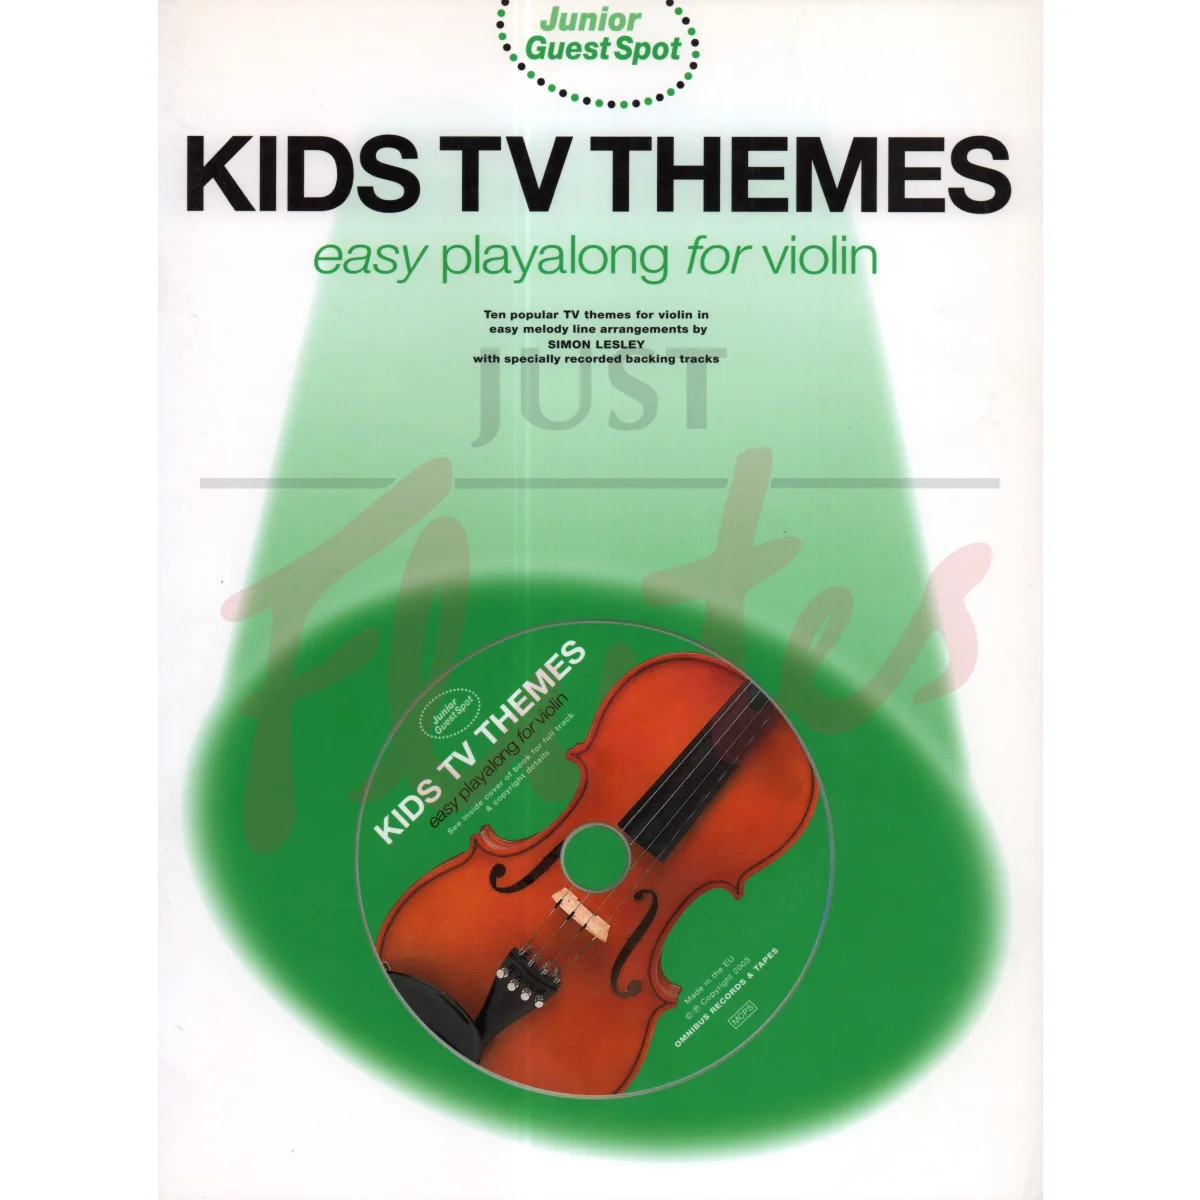 Junior Guest Spot - Kids TV Themes for Violin